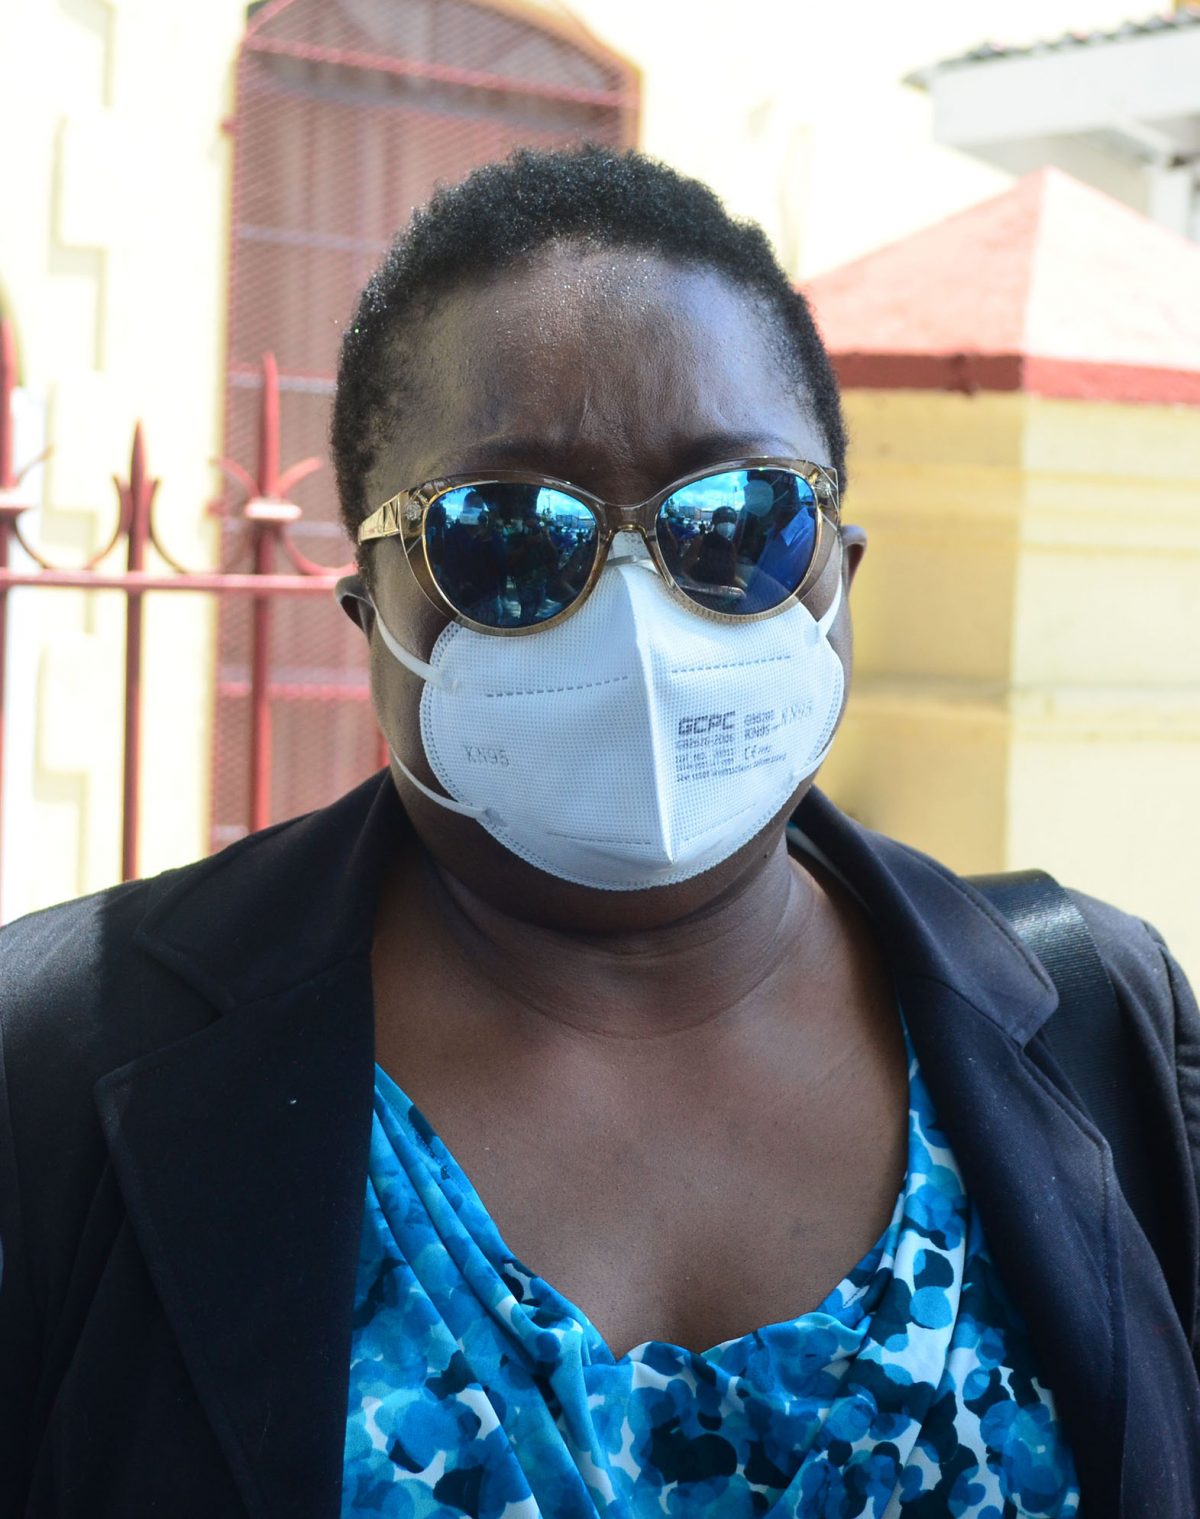 Roxanne Myers
outside the city
courts yesterday 